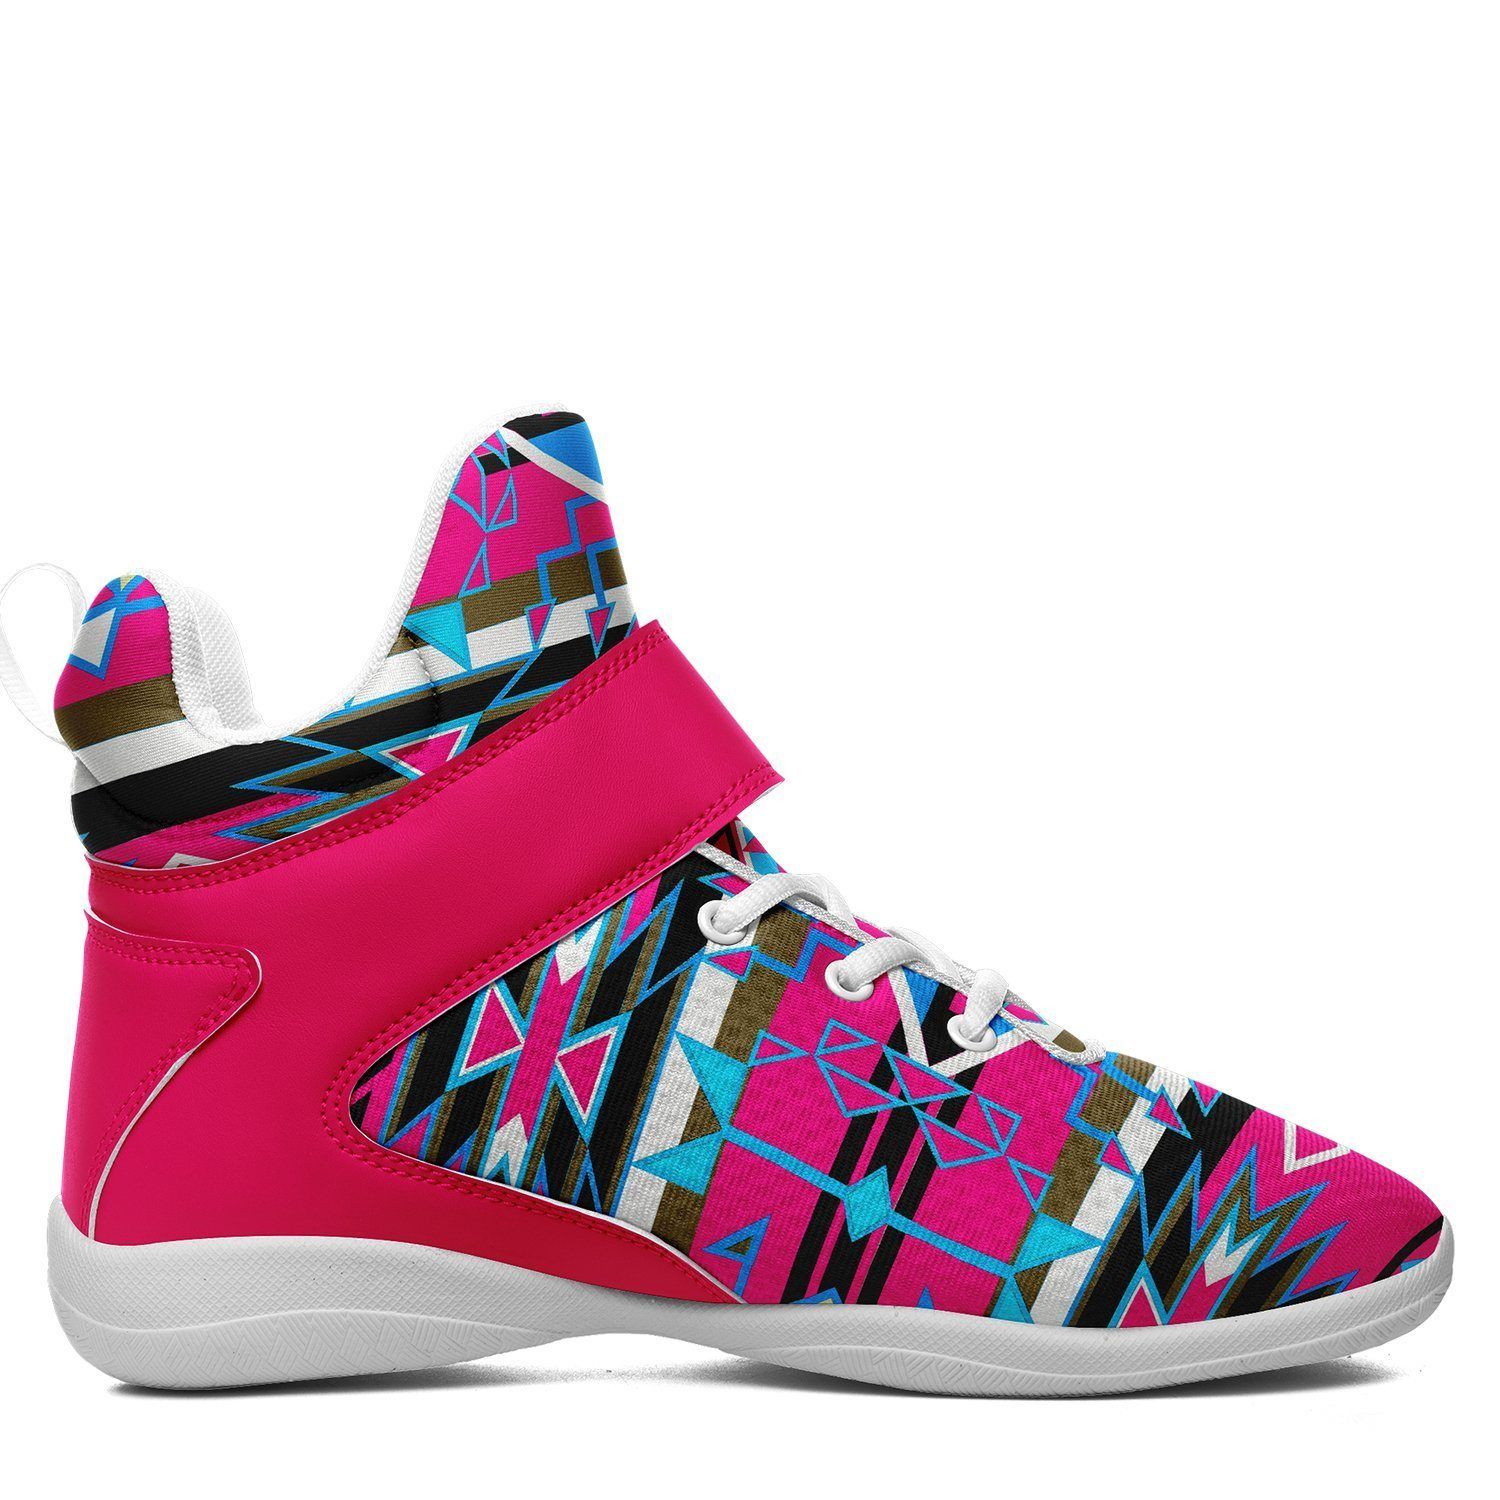 Force of Nature Sunset Storm Ipottaa Basketball / Sport High Top Shoes - White Sole 49 Dzine 